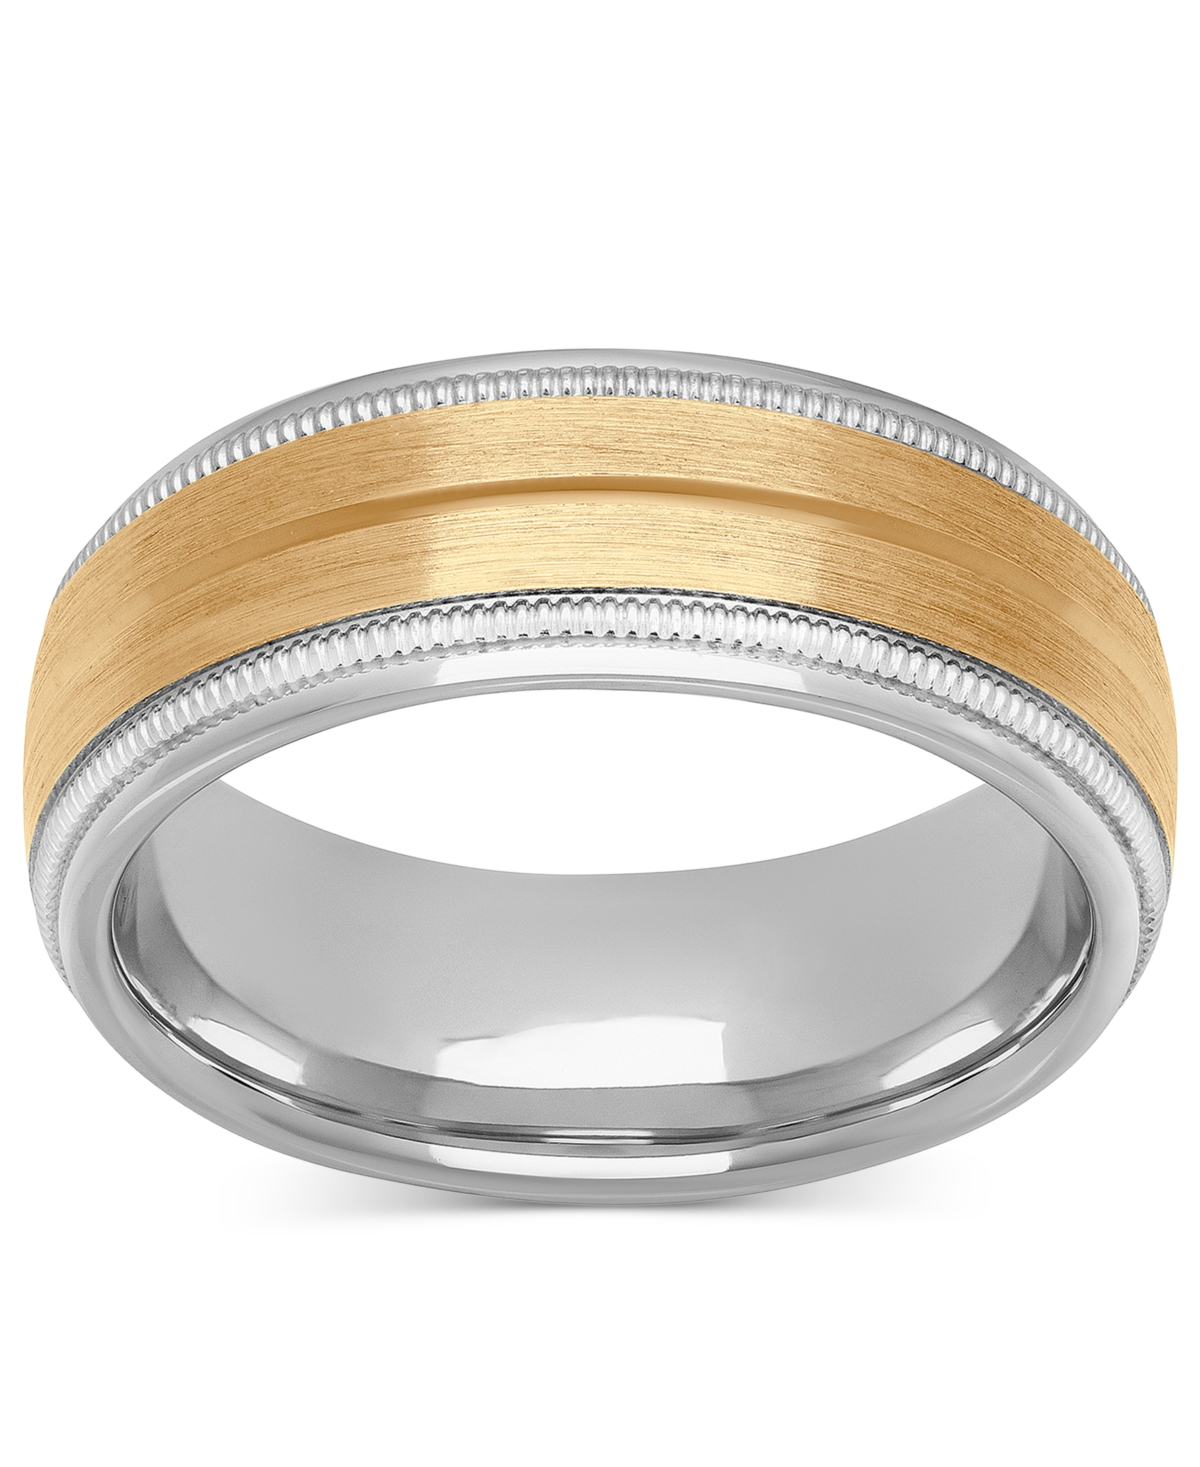 Macy's Men's Satin Finish Beaded Wedding Band In Sterling Silver & 18k Gold-plate In Two-tone